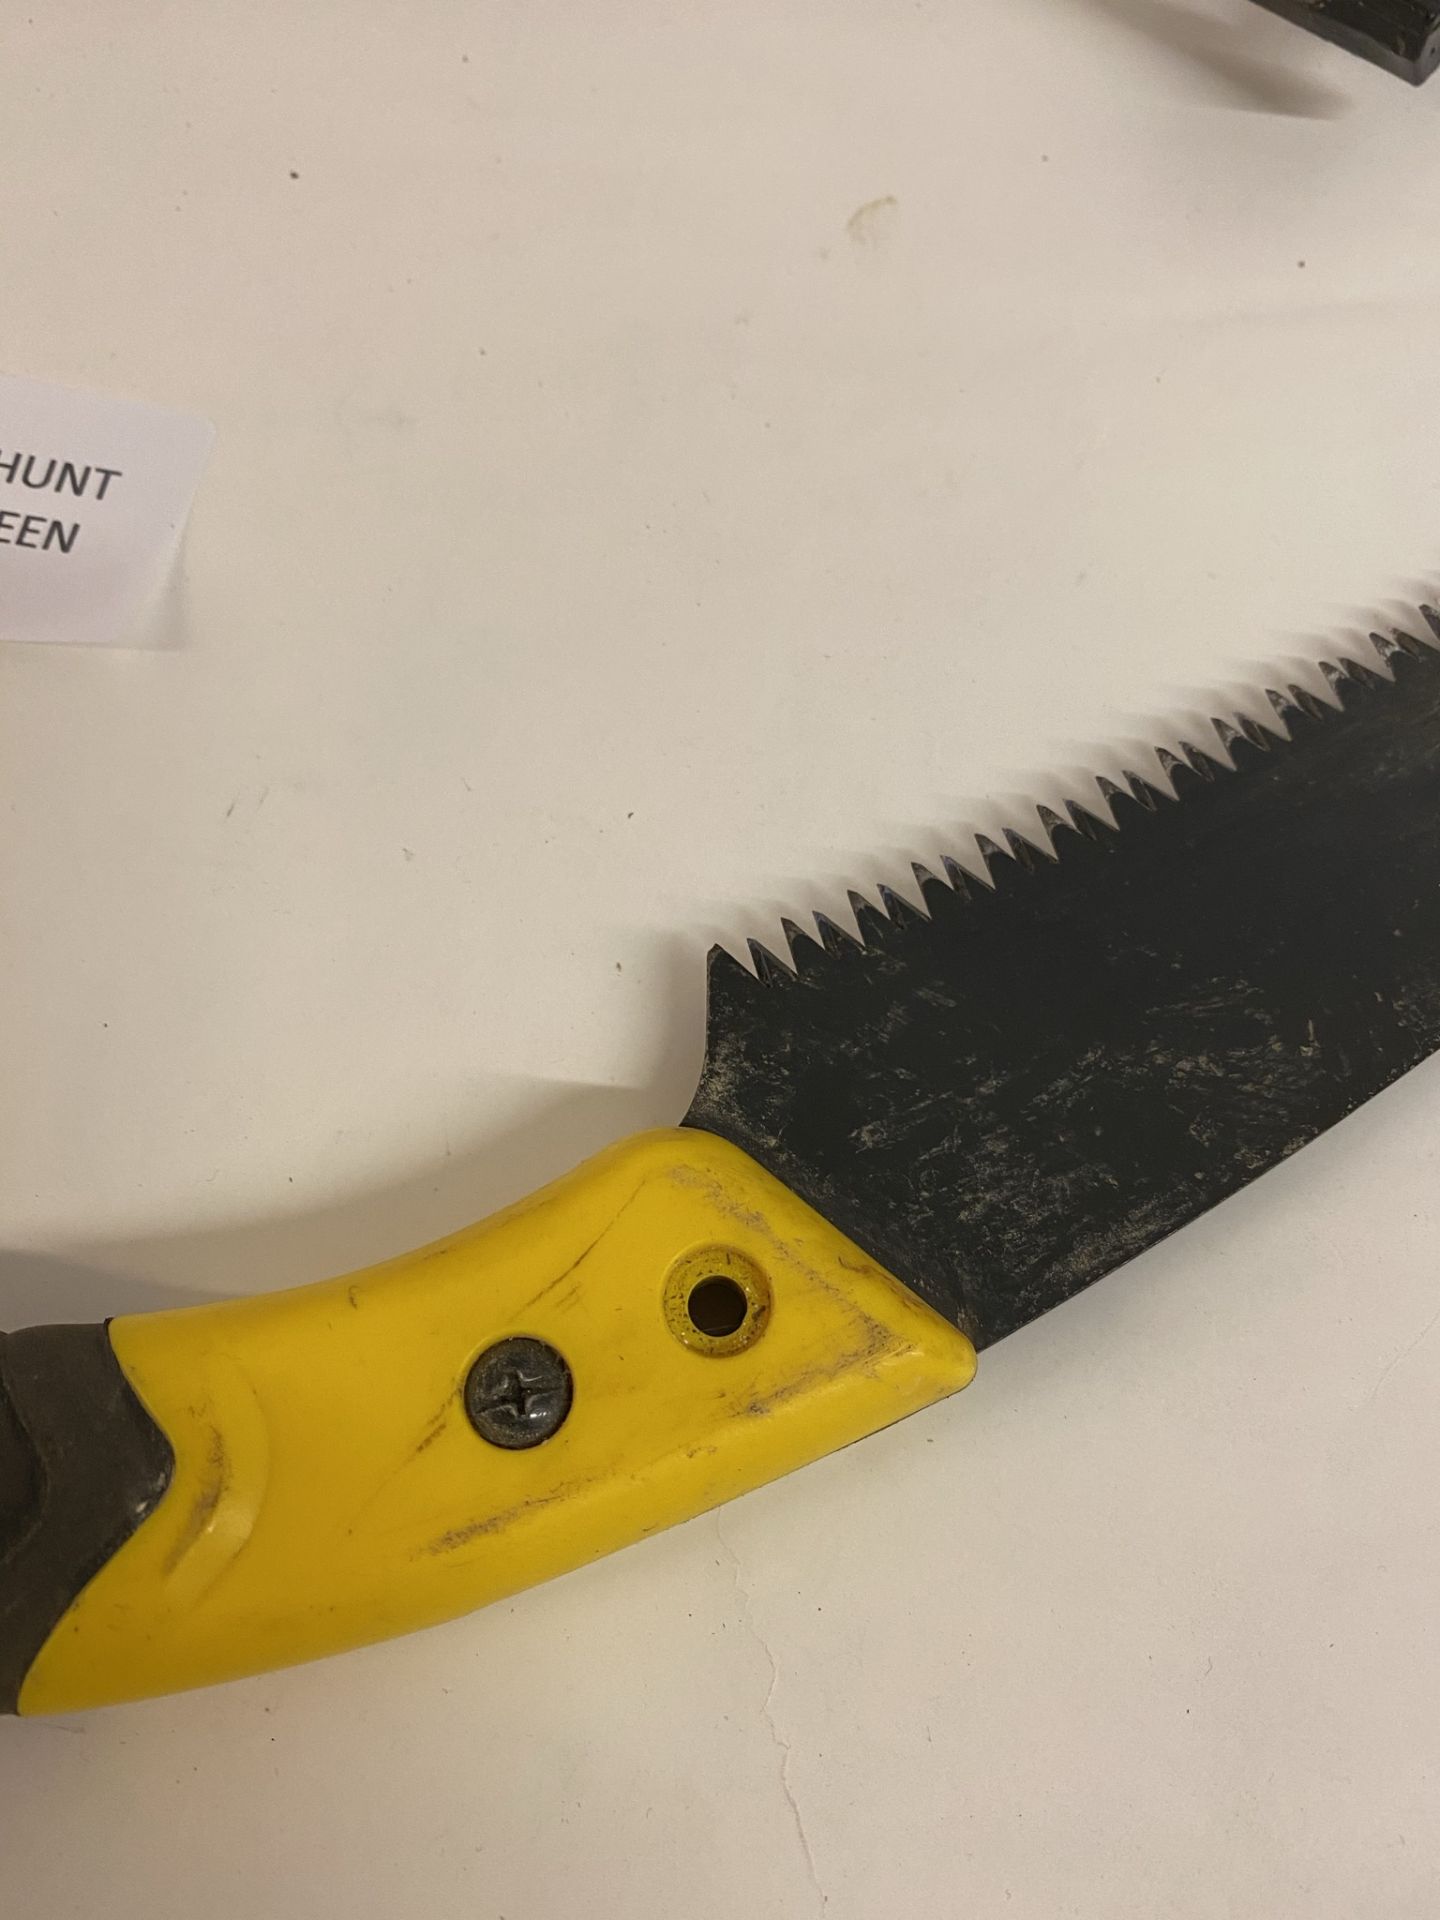 STANLEY 33cm (13") Pruning Saw + Protection Sheath (1 screw/ bolt missing, see image) - Image 2 of 2